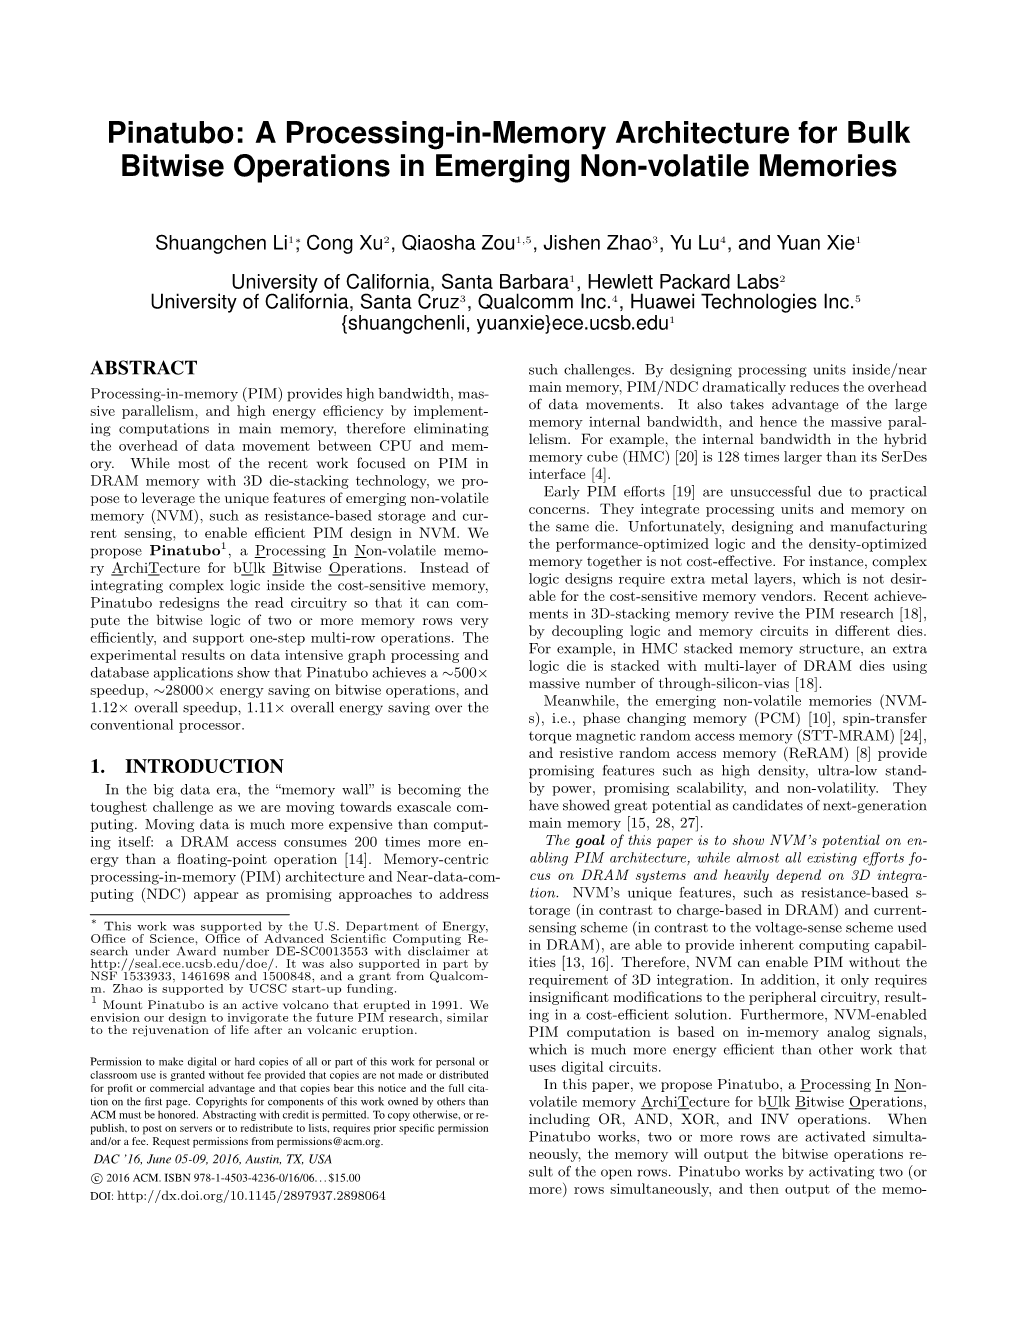 Pinatubo: a Processing-In-Memory Architecture for Bulk Bitwise Operations in Emerging Non-Volatile Memories